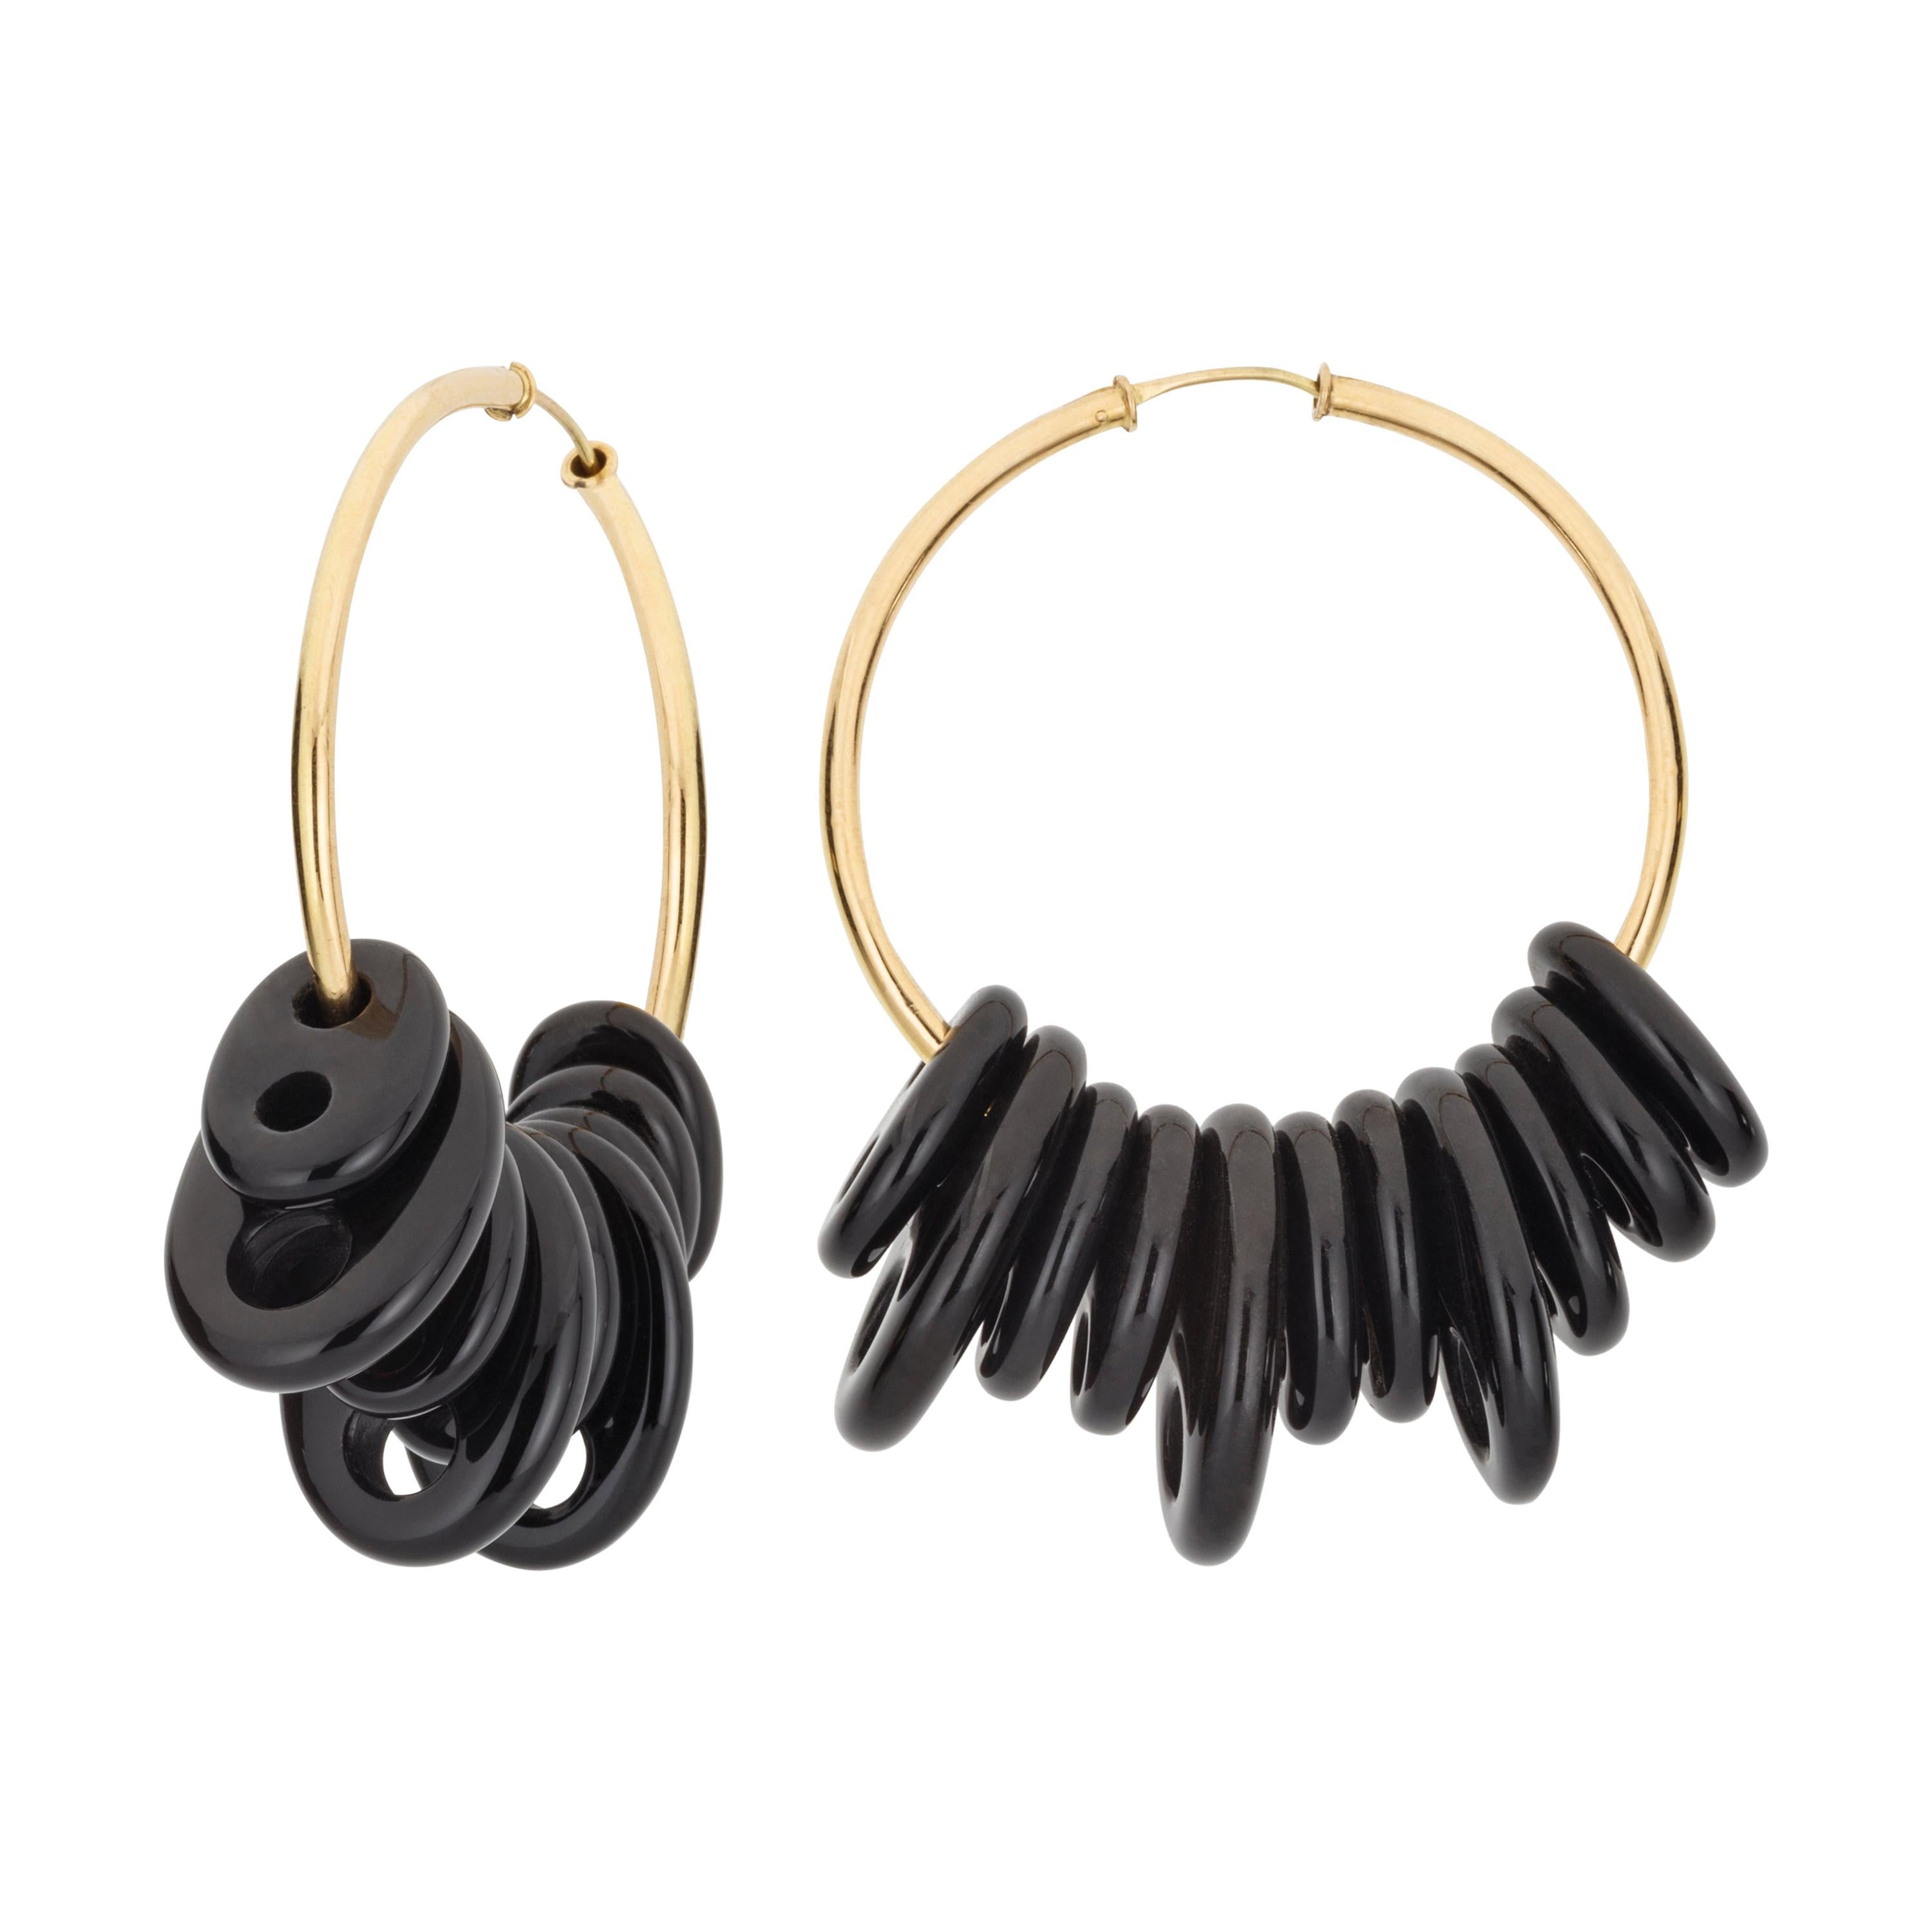 Contemporary Statement Onyx and 18k Yellow Gold Hoops Earrings